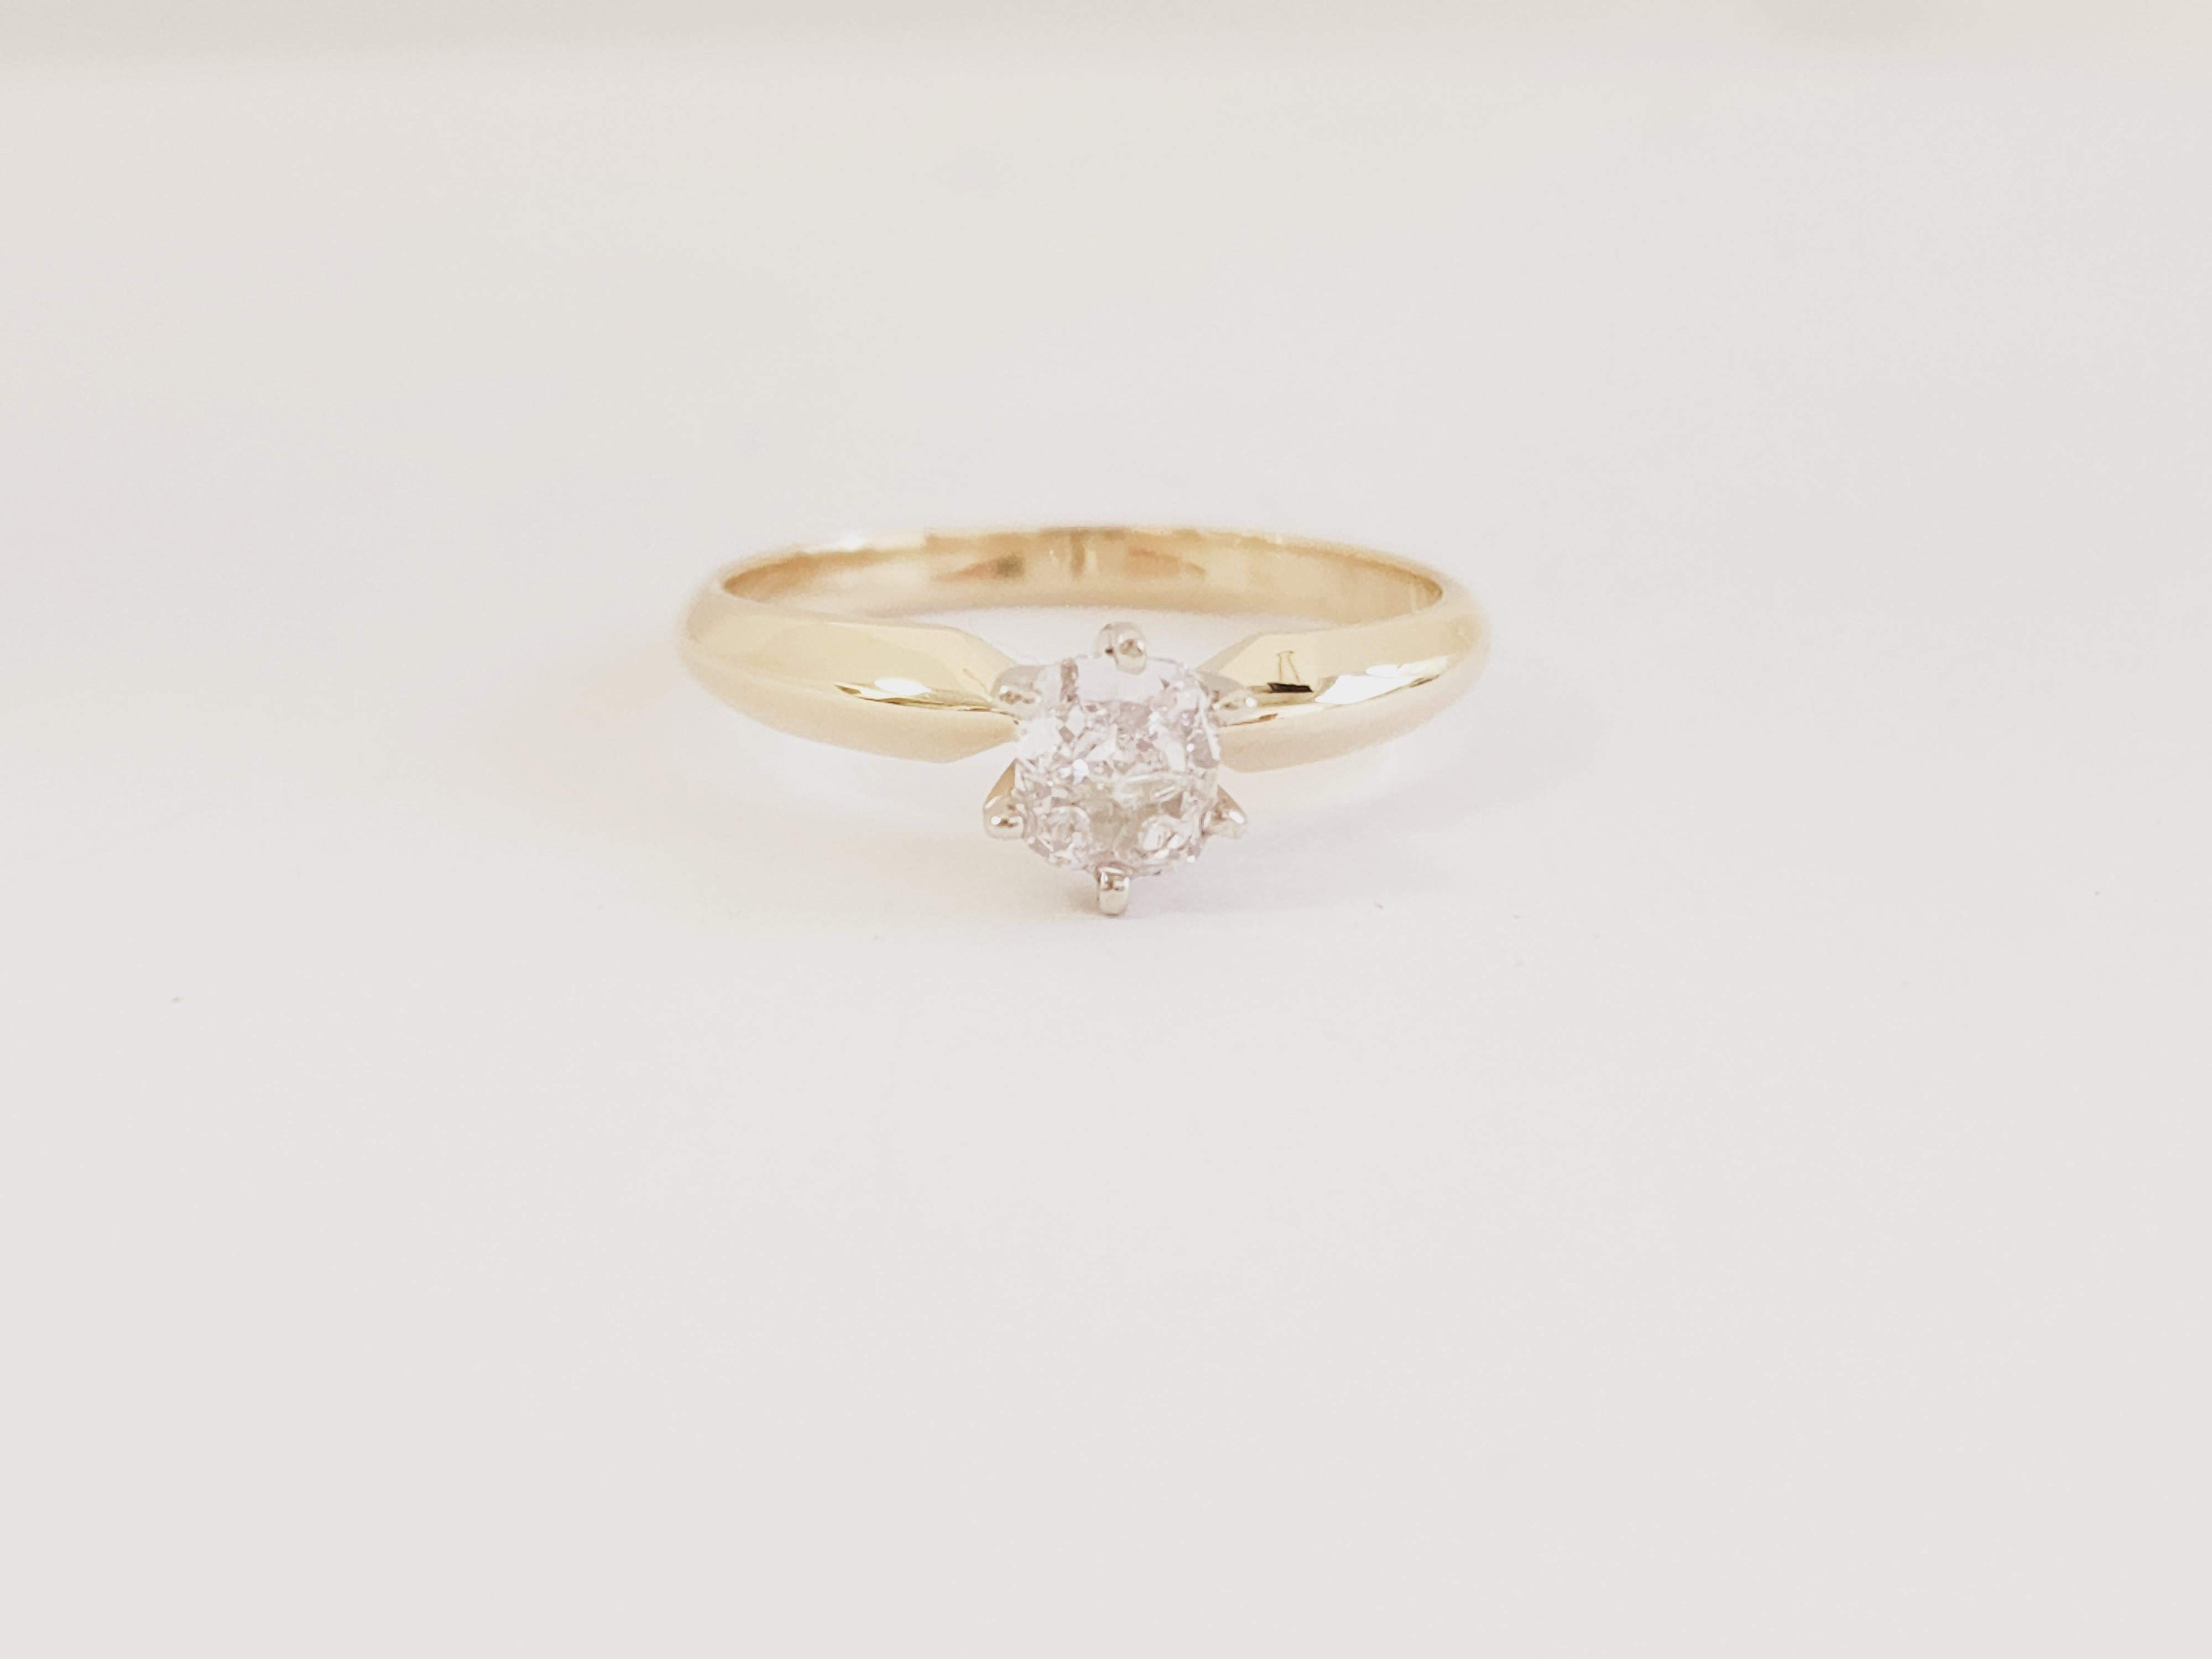 Gorgeous diamond ring features a 0.53 carat GIA faint pink cushion diamond solitaire set in a beautiful 14 karat yellow gold. 
Ring Size 7